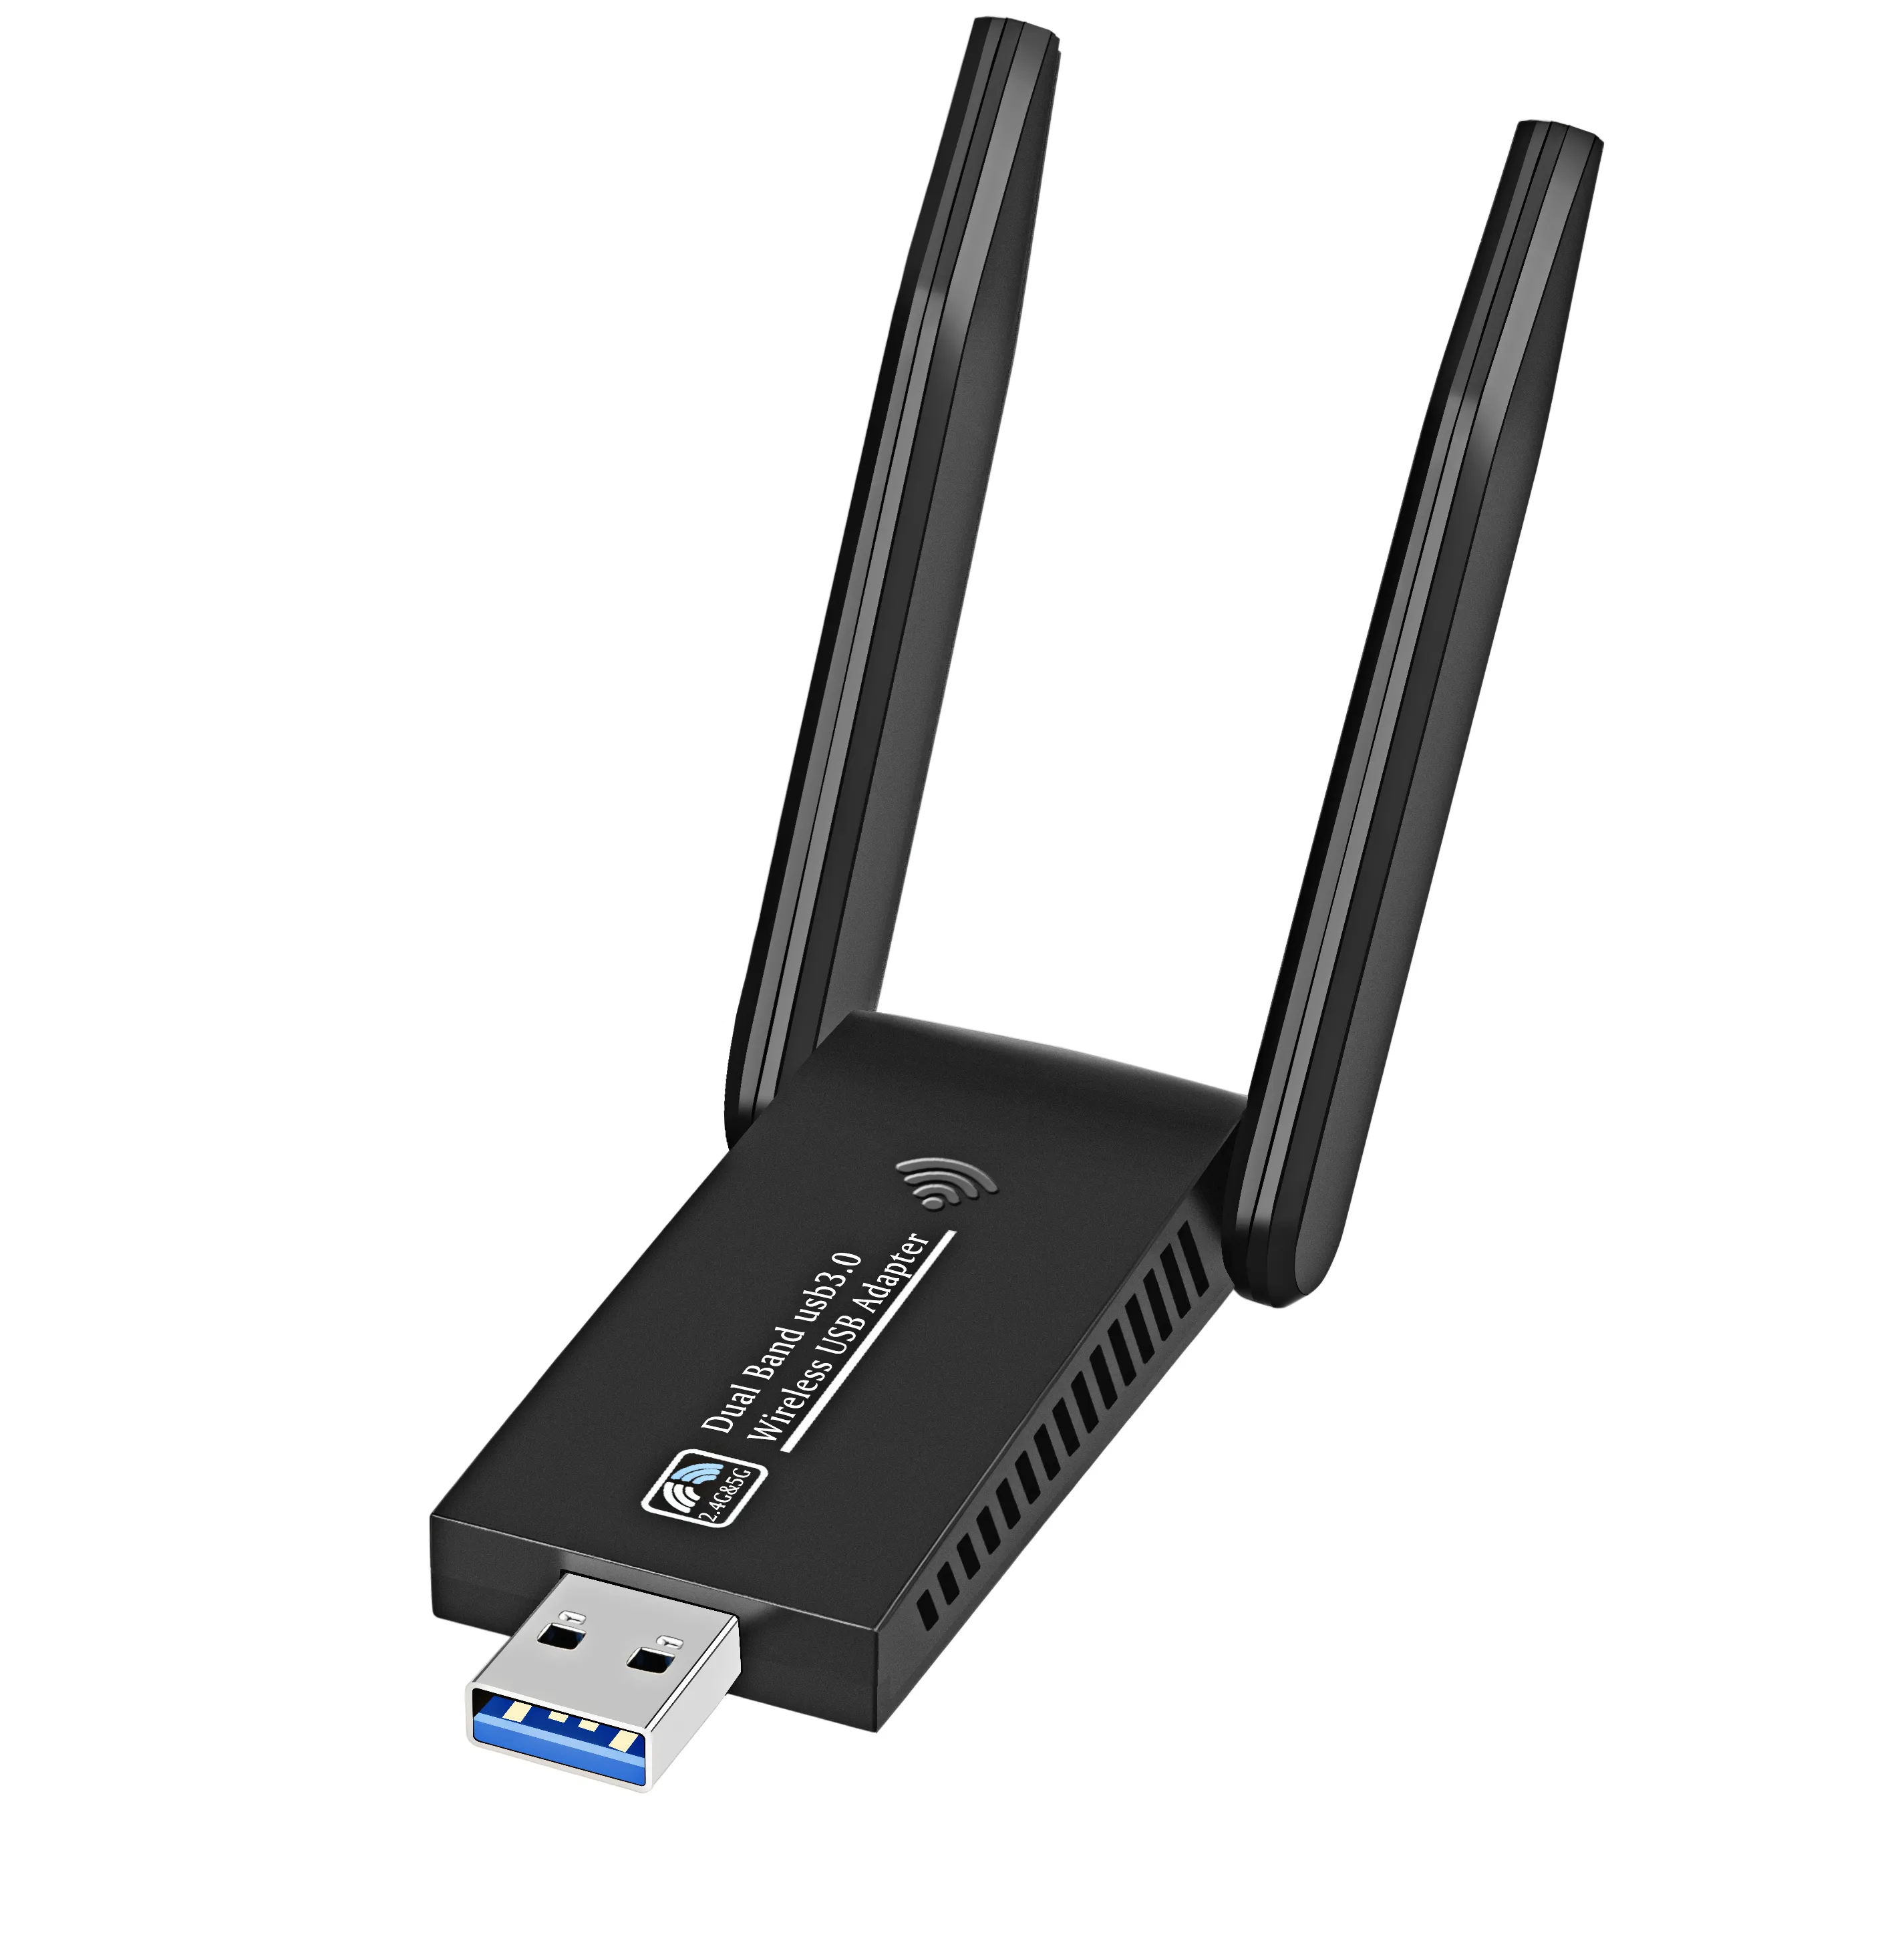 USB WiFi Adapter 1300Mbps USB 3.0 WiFi 802.11 ac Wireless Network Adapter with Dual Band 2.42GHz/300Mbps 5.8GHz/866Mbps